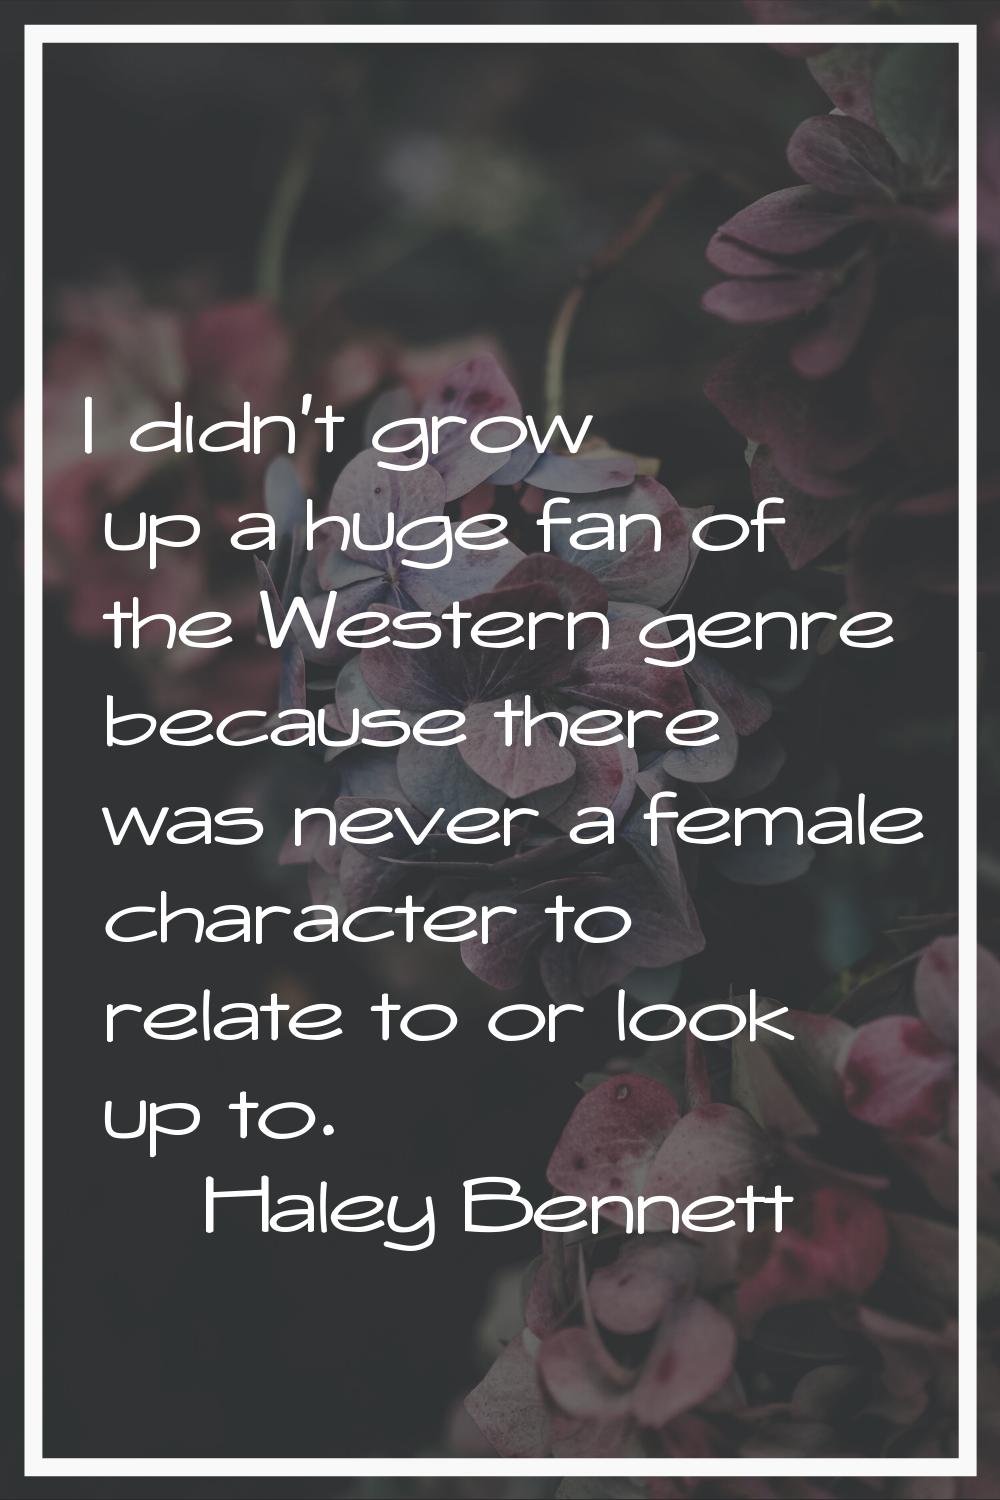 I didn't grow up a huge fan of the Western genre because there was never a female character to rela